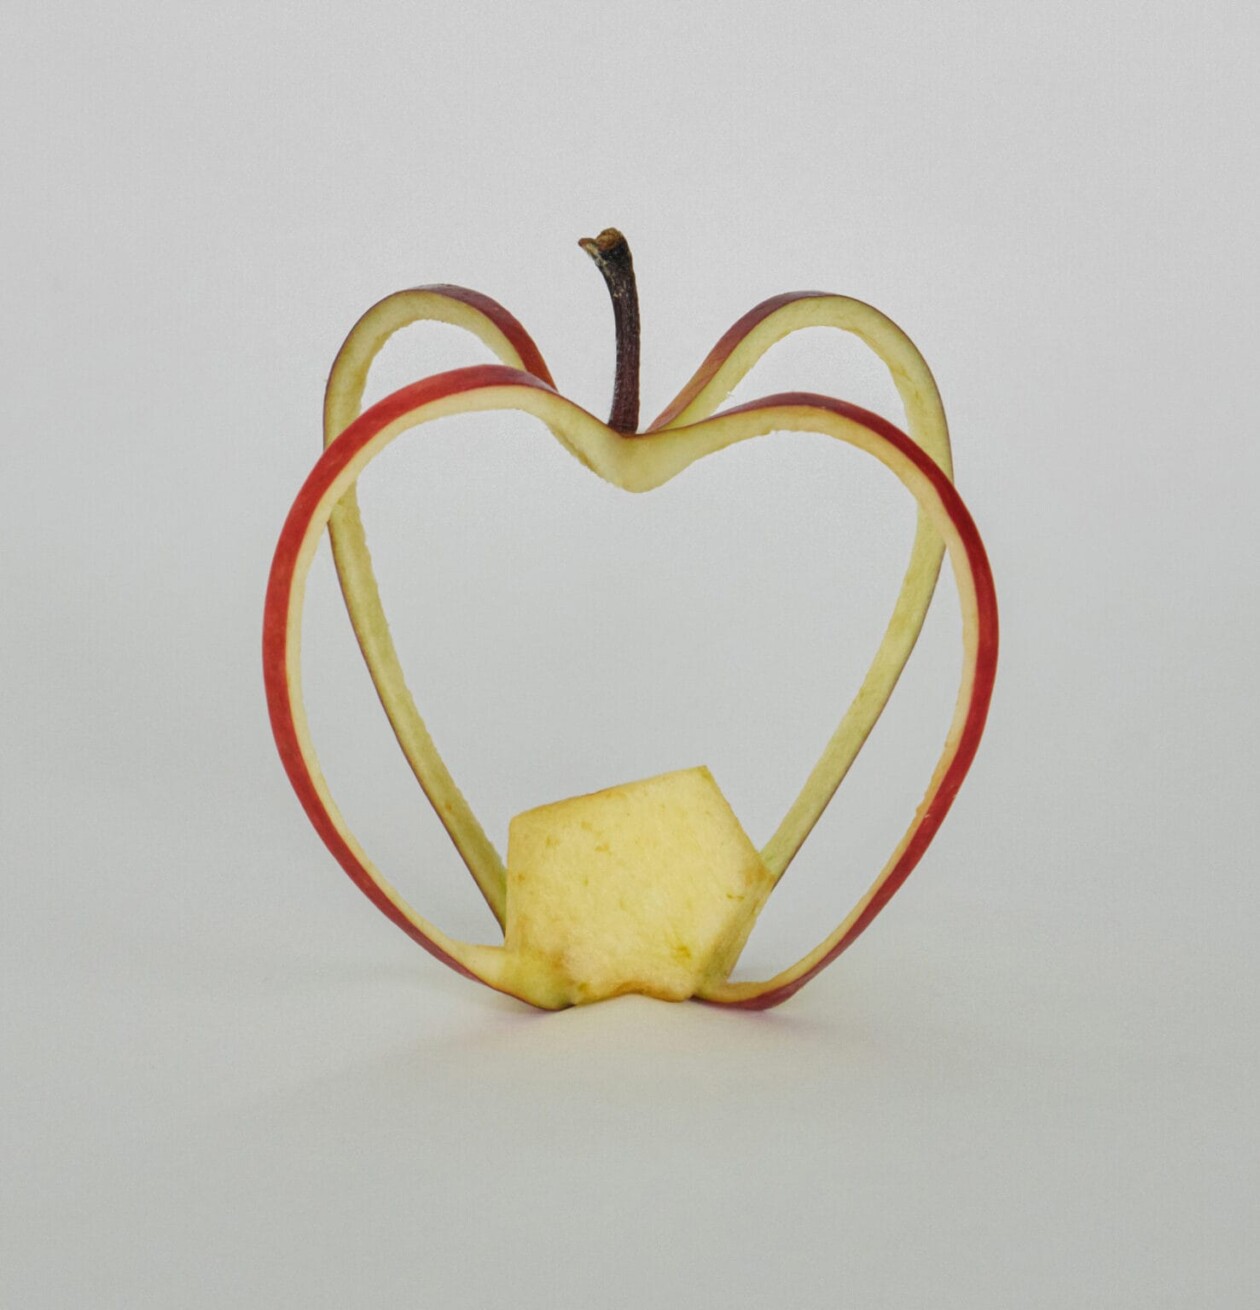 Smart And Playful Sculptures Carved Out Of Apples By Chinese Artist Can Sun (3)